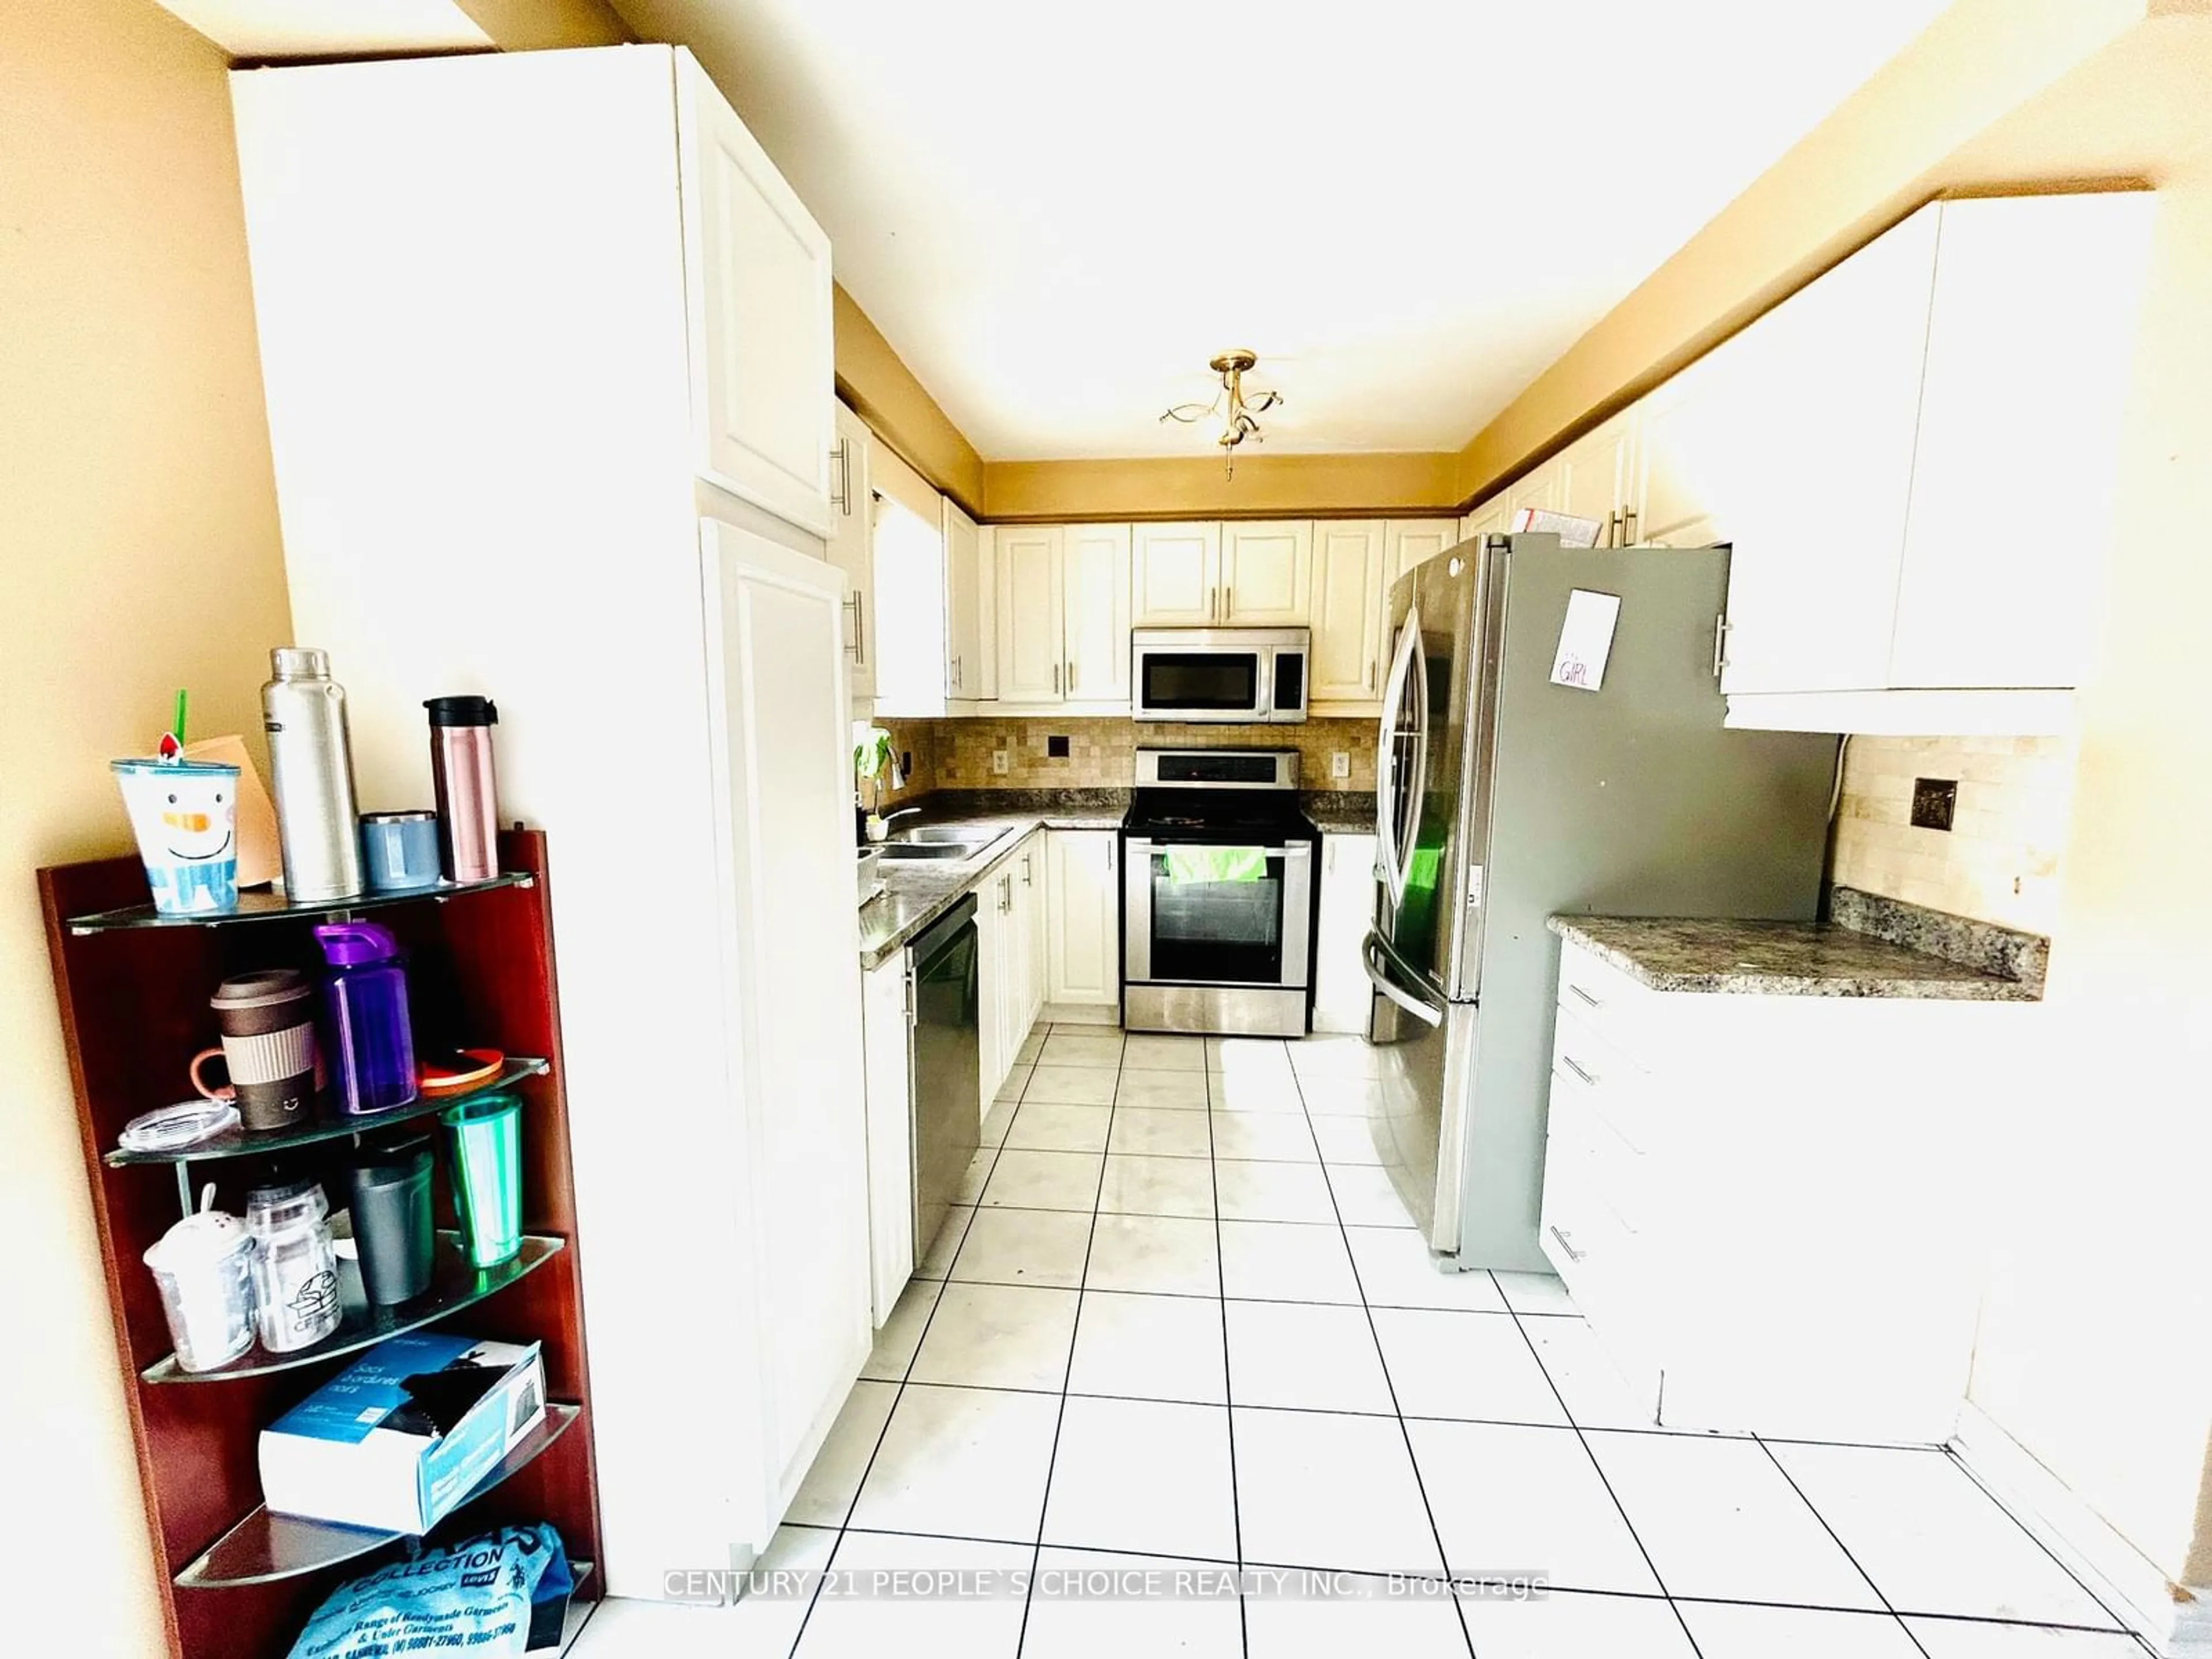 Kitchen for 3 Weatherell Dr, Brampton Ontario L7A 1Y7